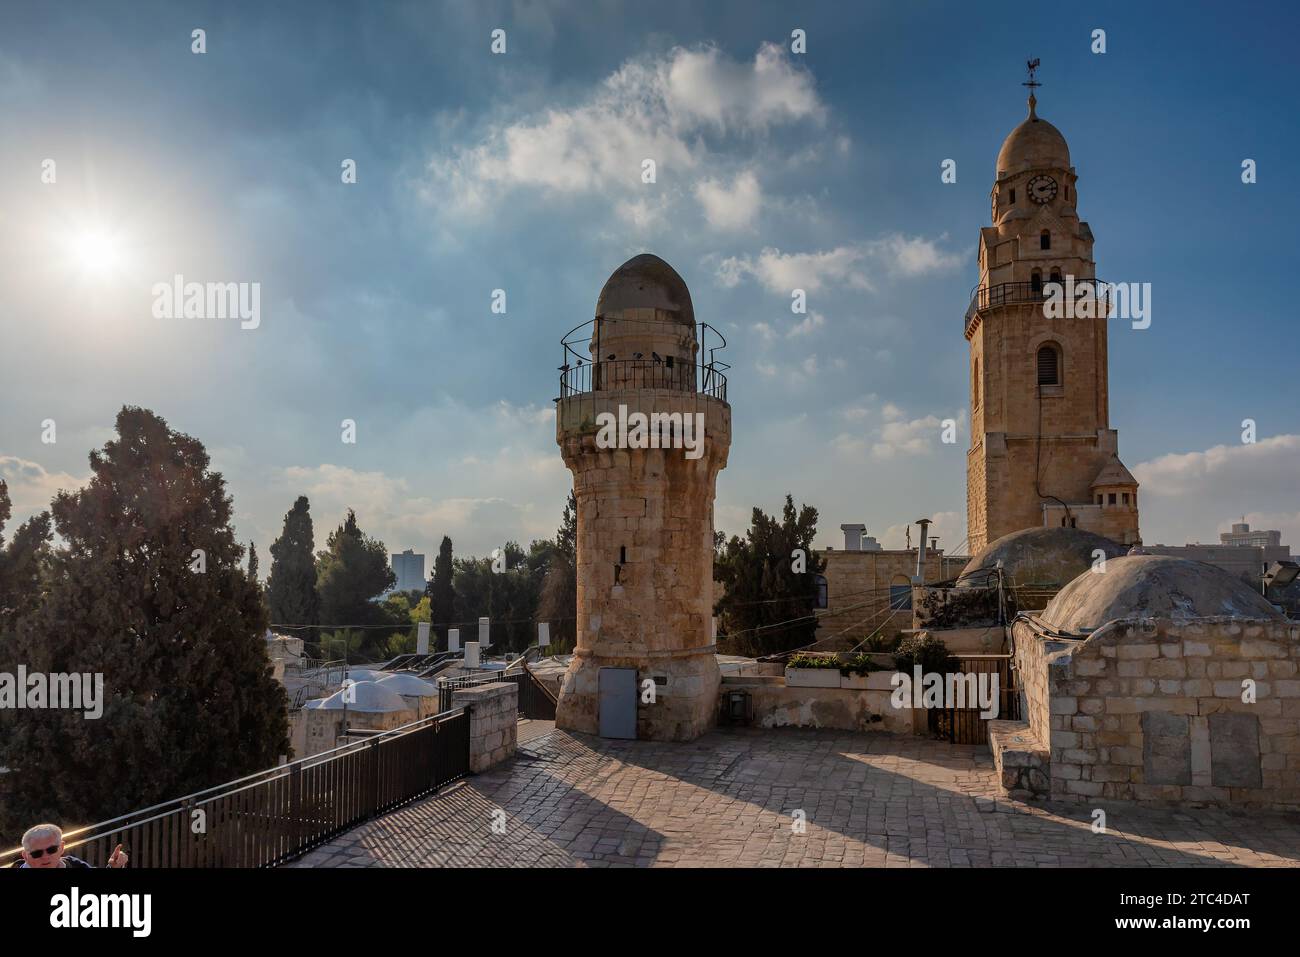 The bell towers in Dormition Abbey at sunset, near Zion Gate, Jerusalem Old City. Israel. Stock Photo